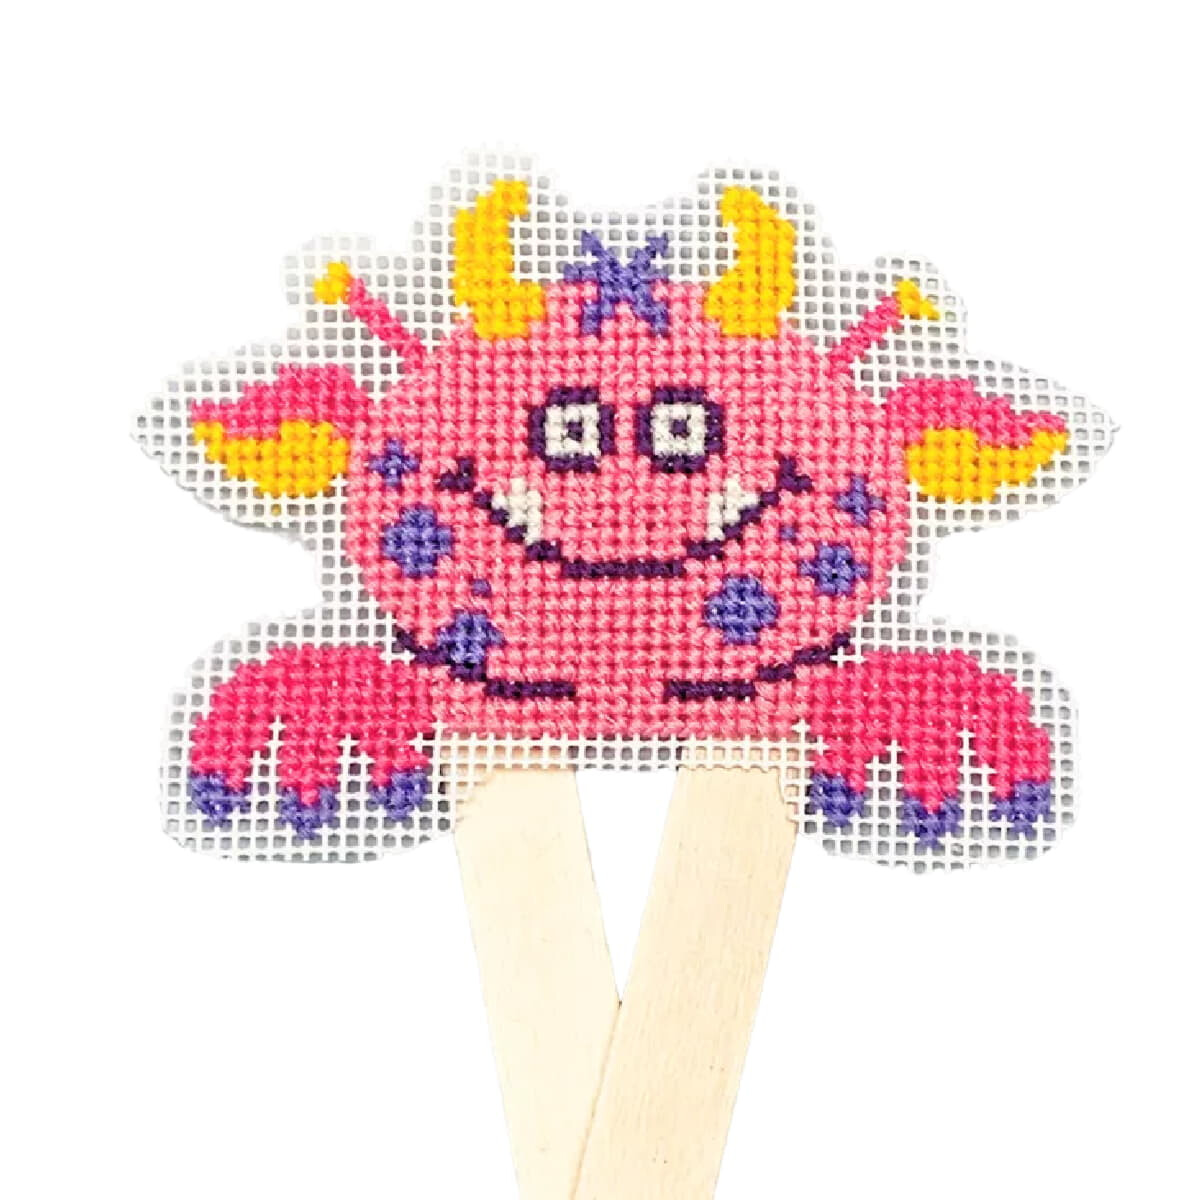 An adorable cross stitch picture of a pink, smiling,...